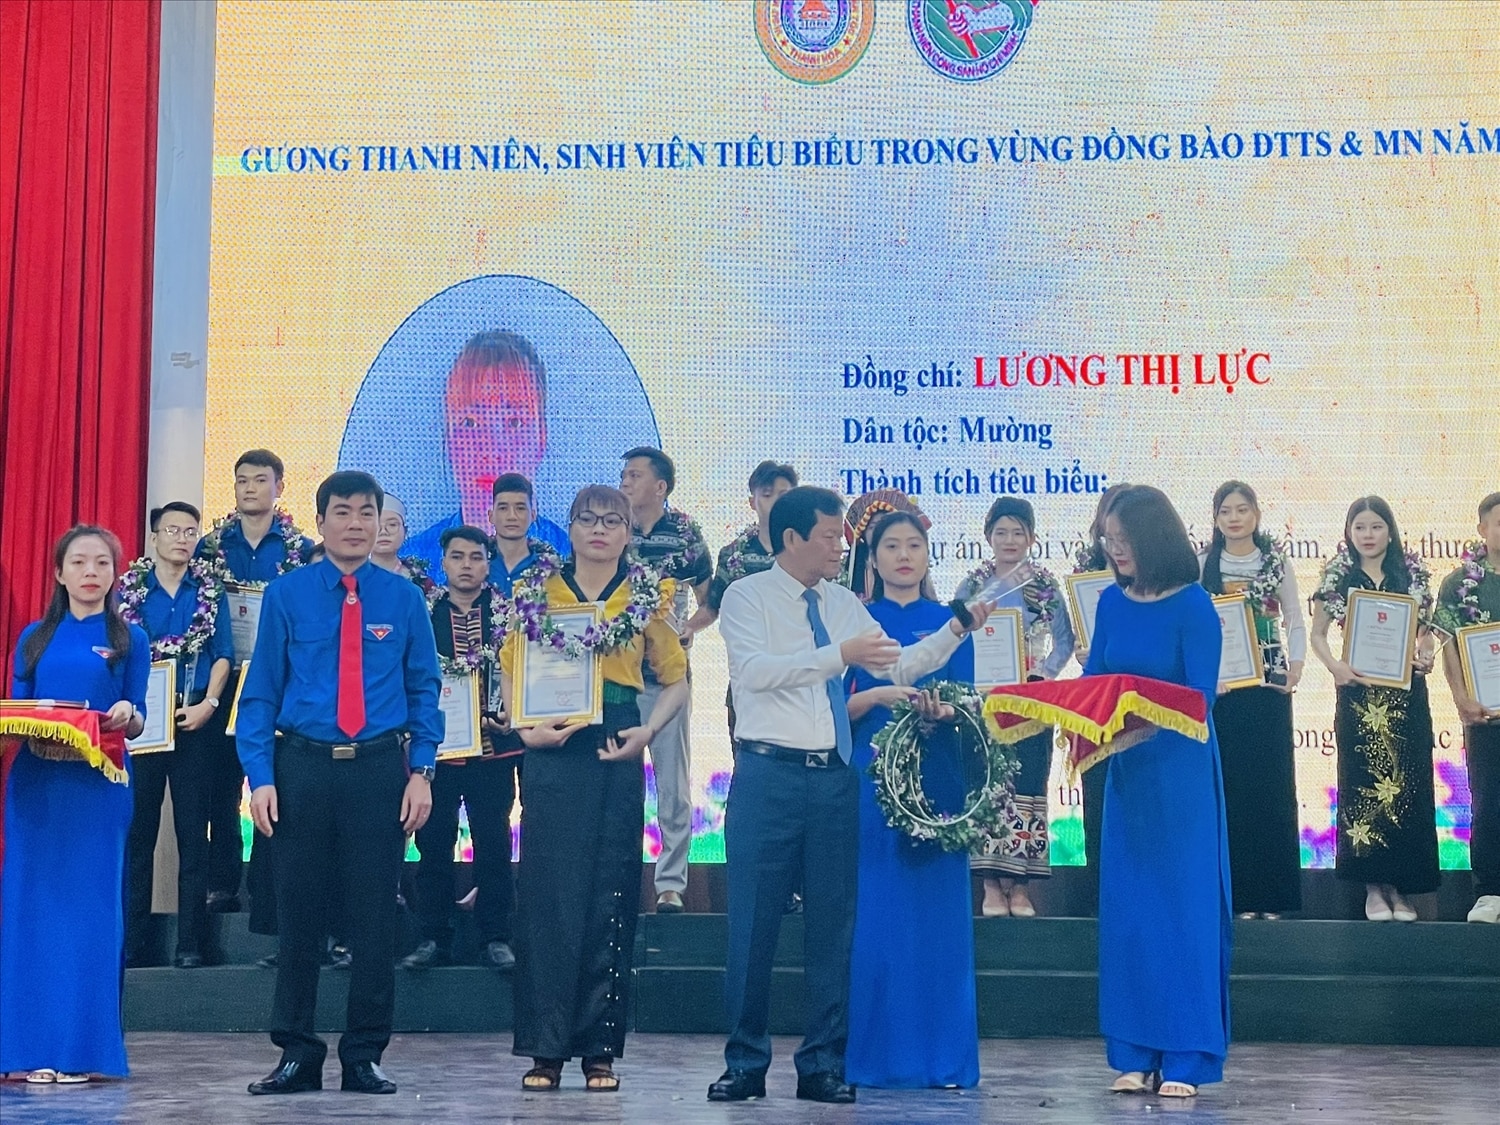 Ms. Luong Thi Luc (person wearing yellow shirt) in Son Dien commune, Quan Son was honored by the Organizing Committee at the Conference.